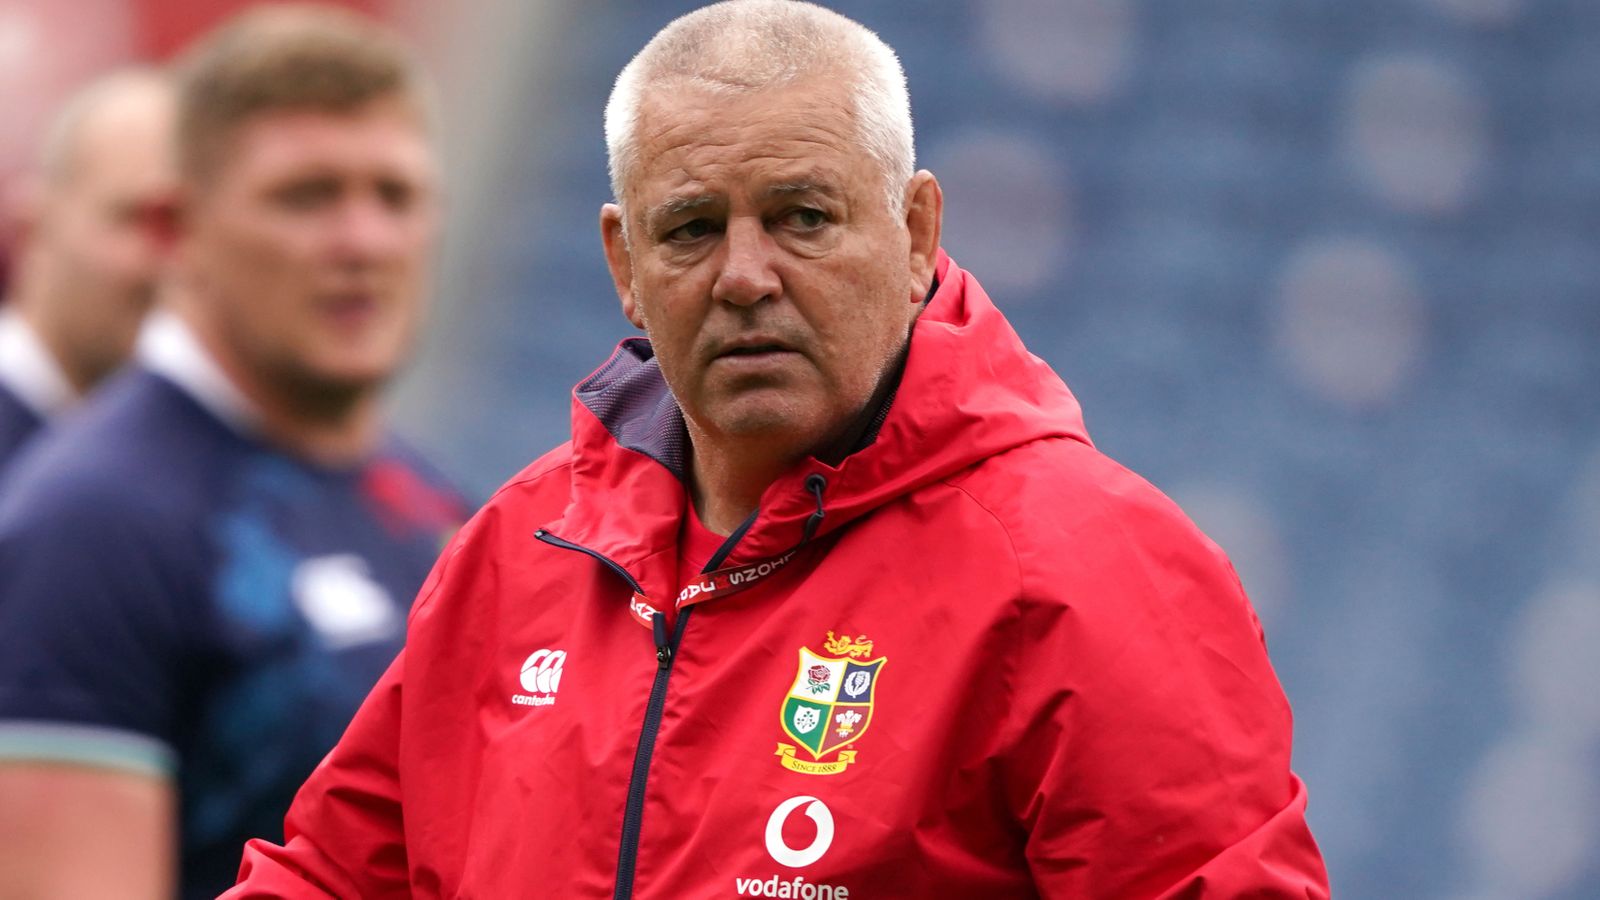 Officially: Warren Gatland rejects the British Lions!